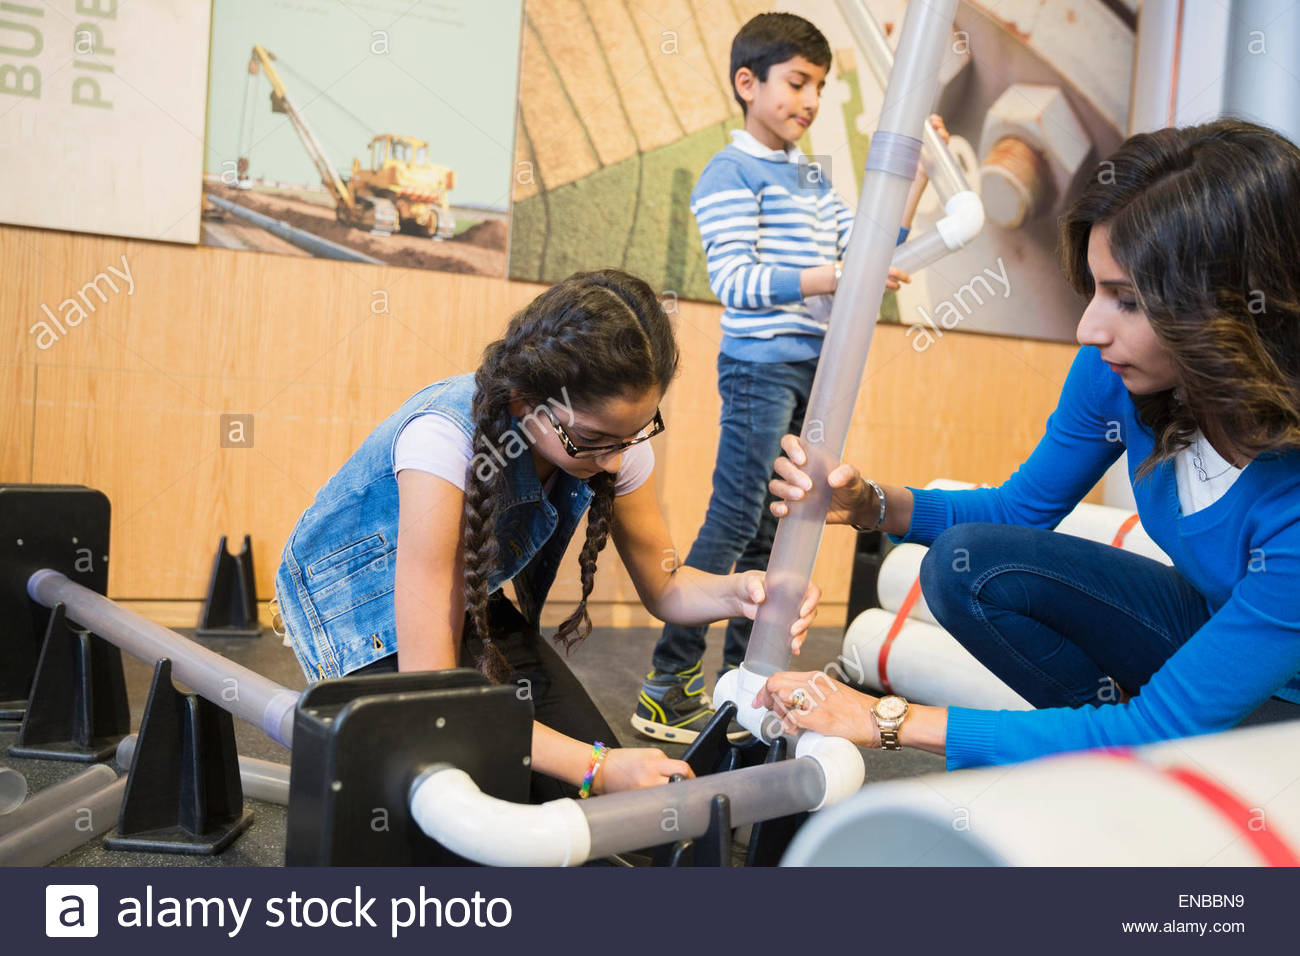 Family assembling pipeline at science center Stock Photo